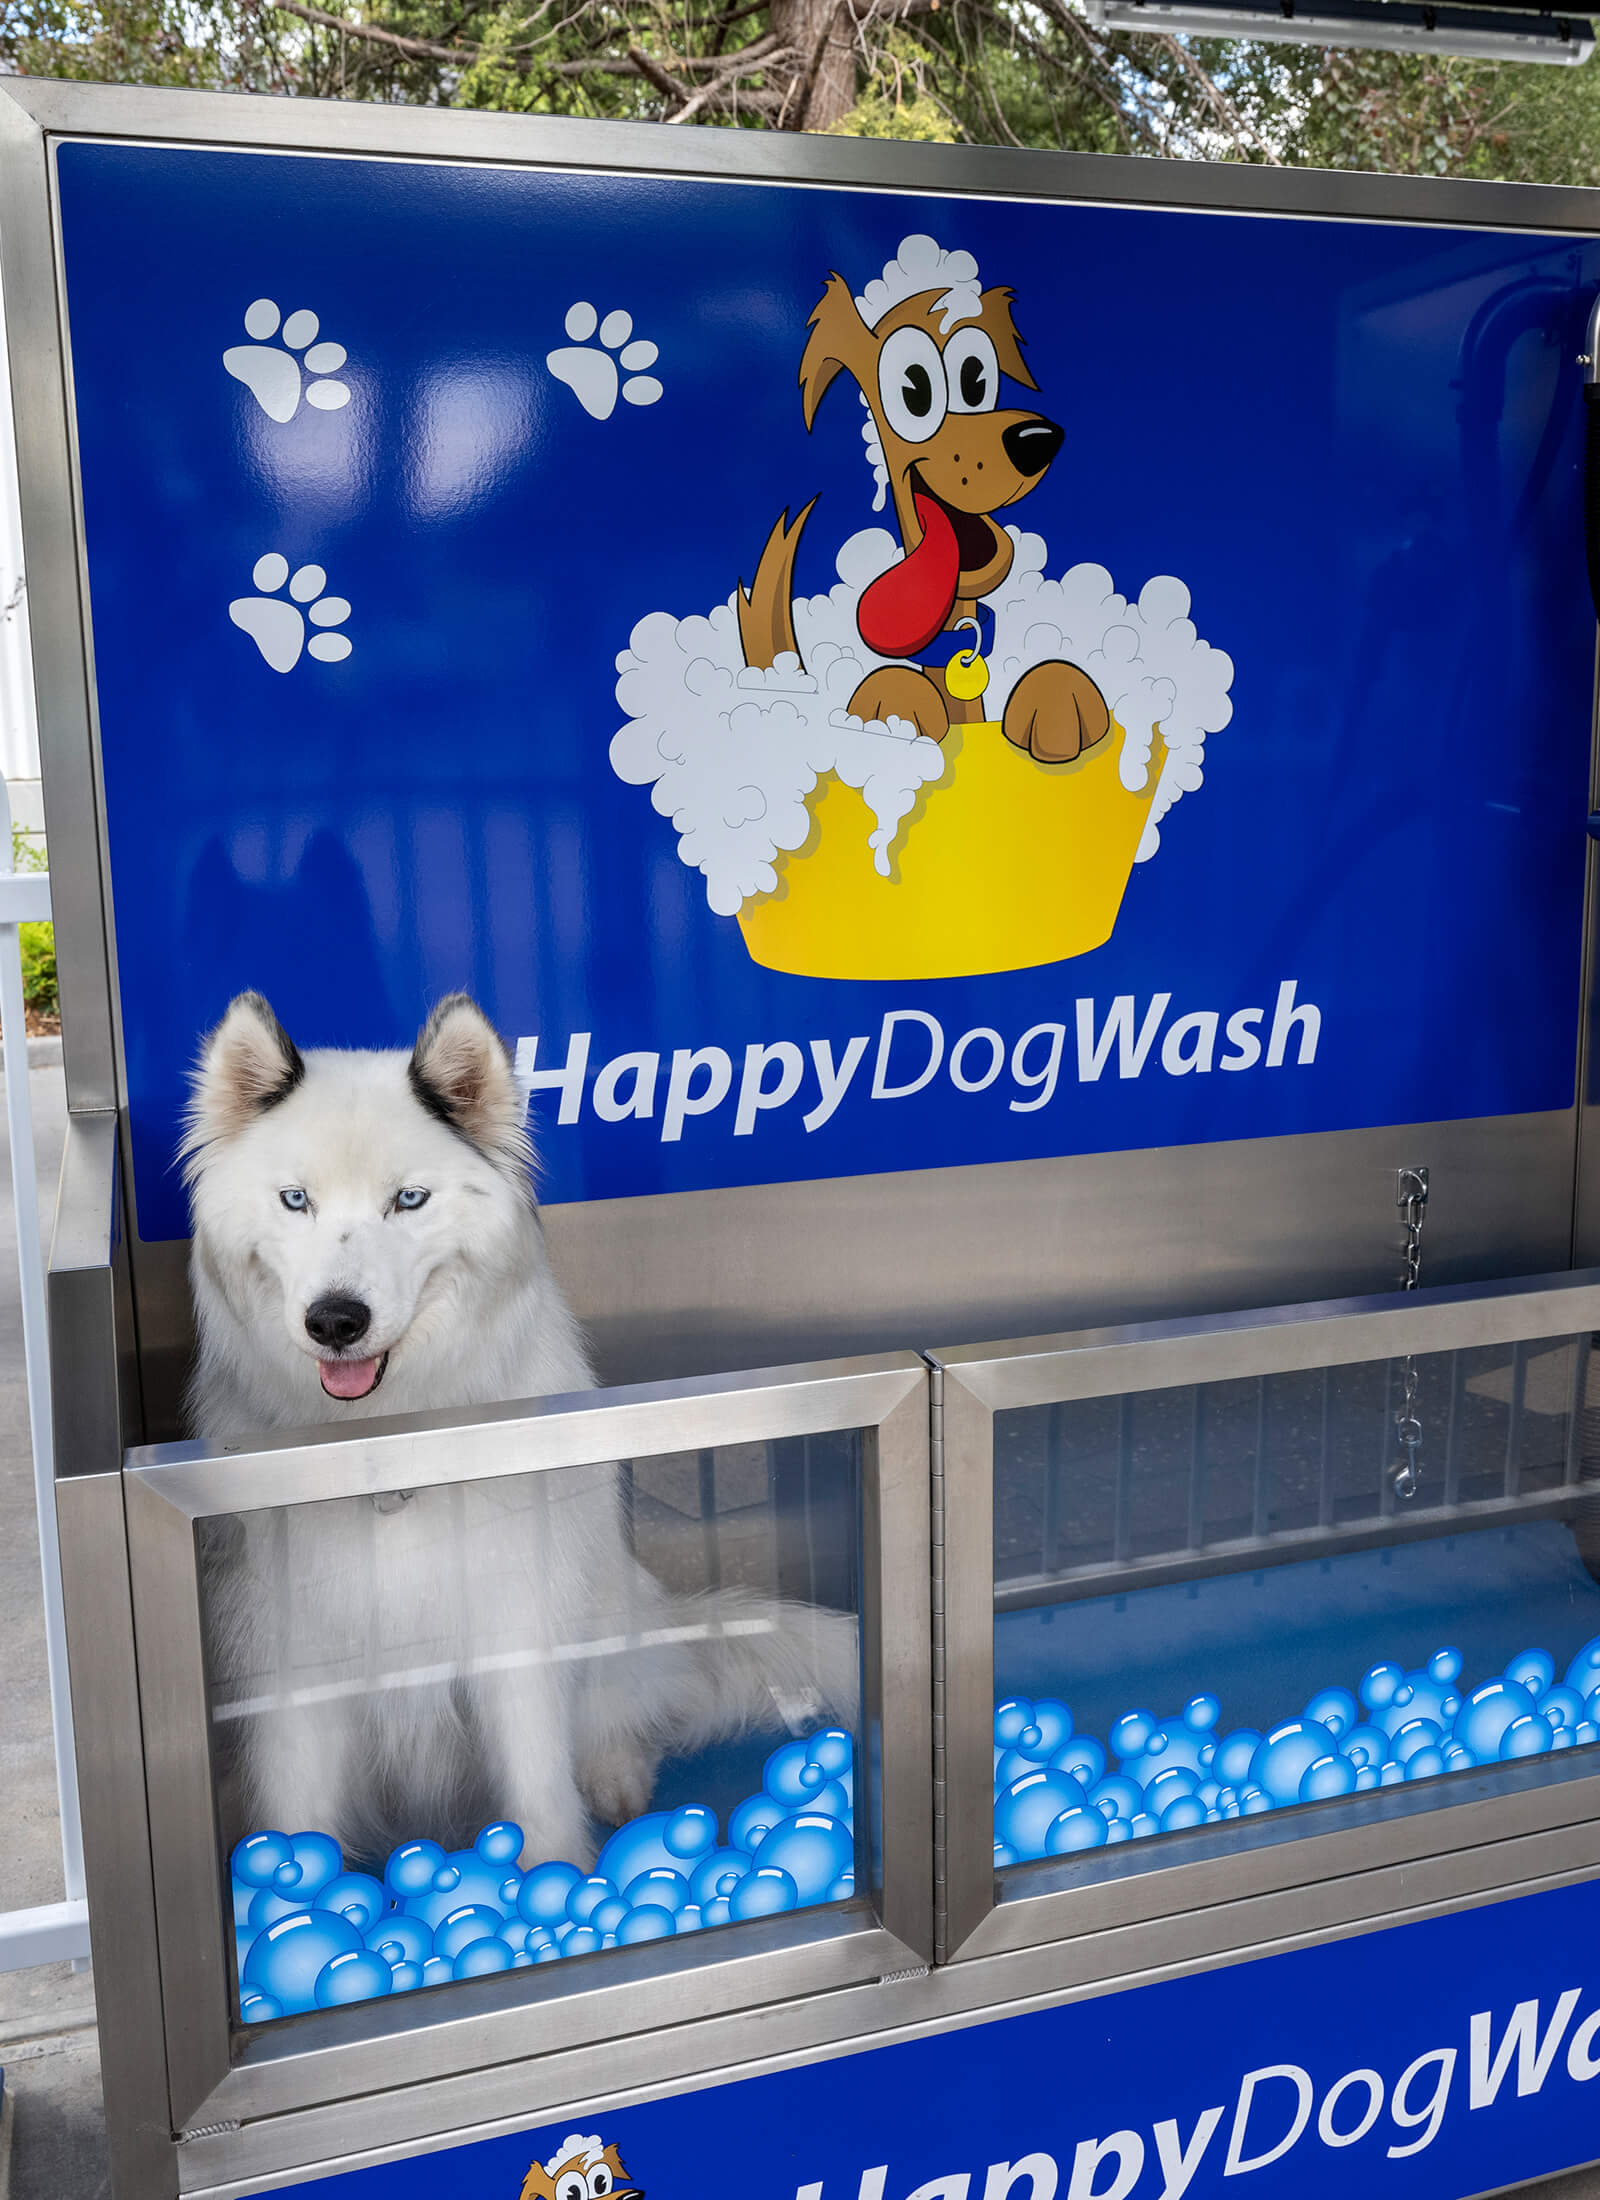 HappyDogWash - no more mess at home, no bathtub disasters and no need to leave your pooch all day at the doggy parlour